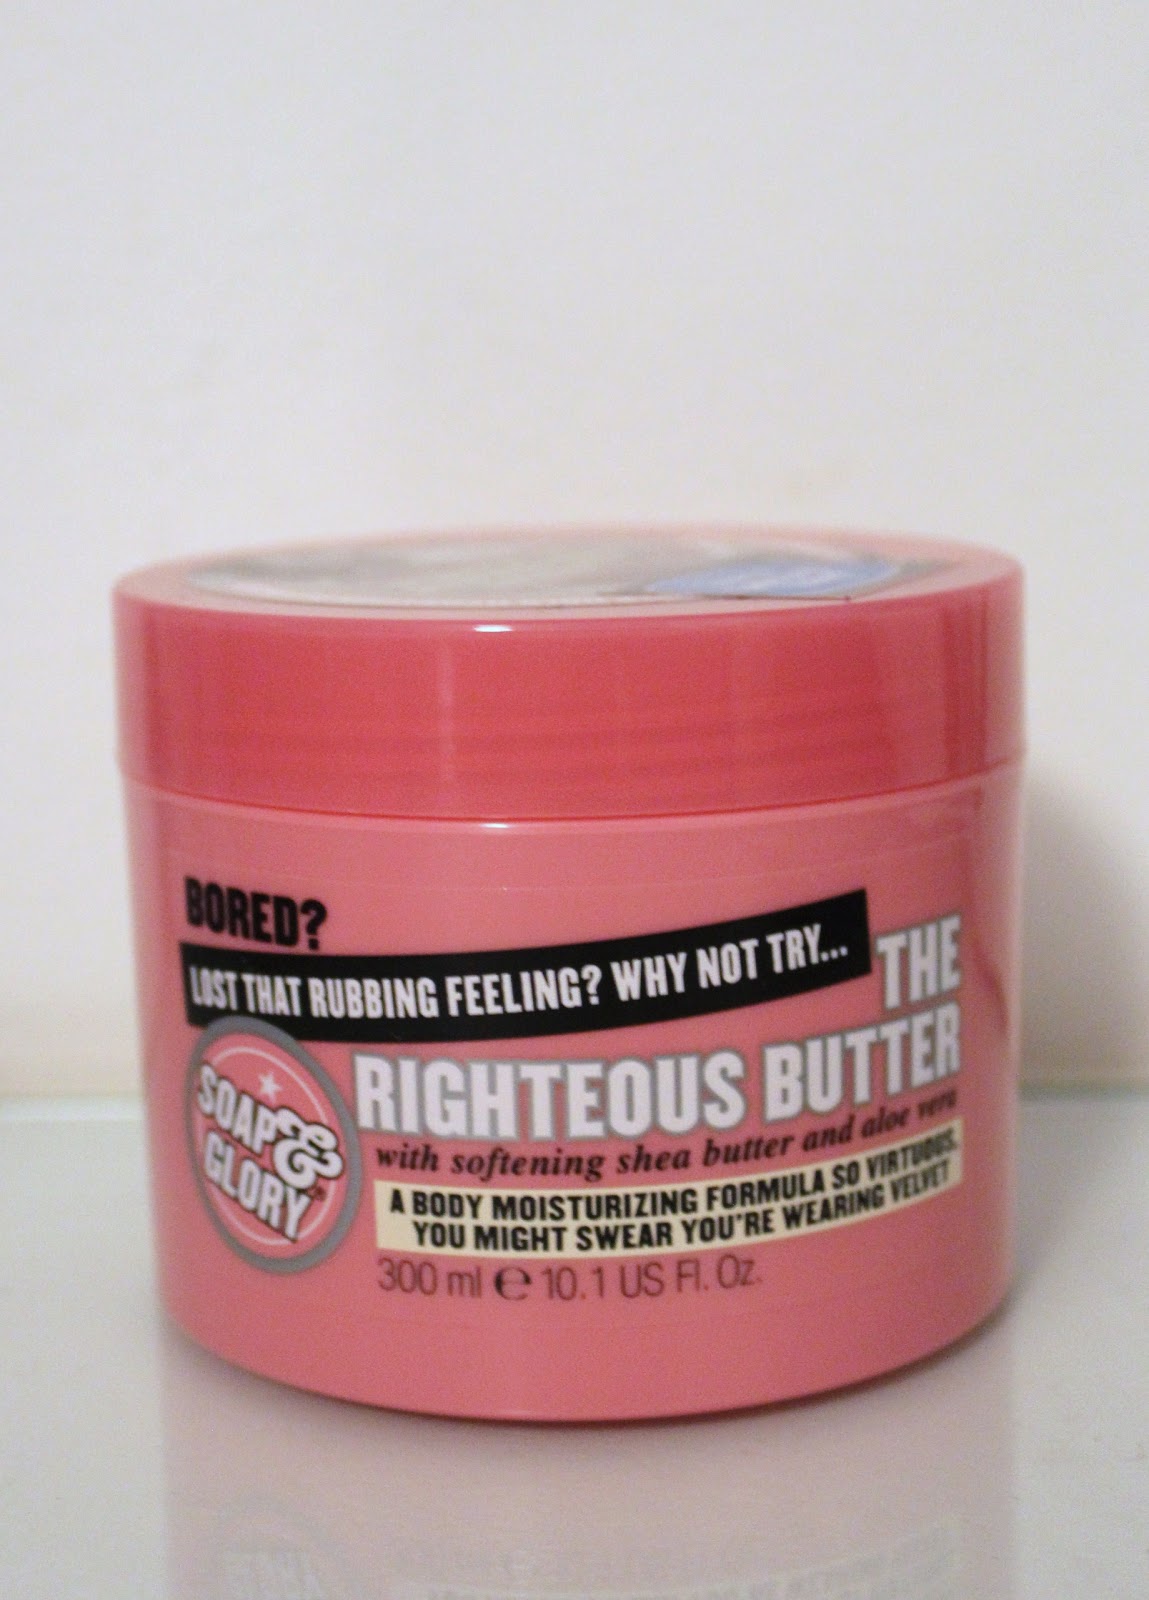 Review: Soap and Glory The Righteous Butter